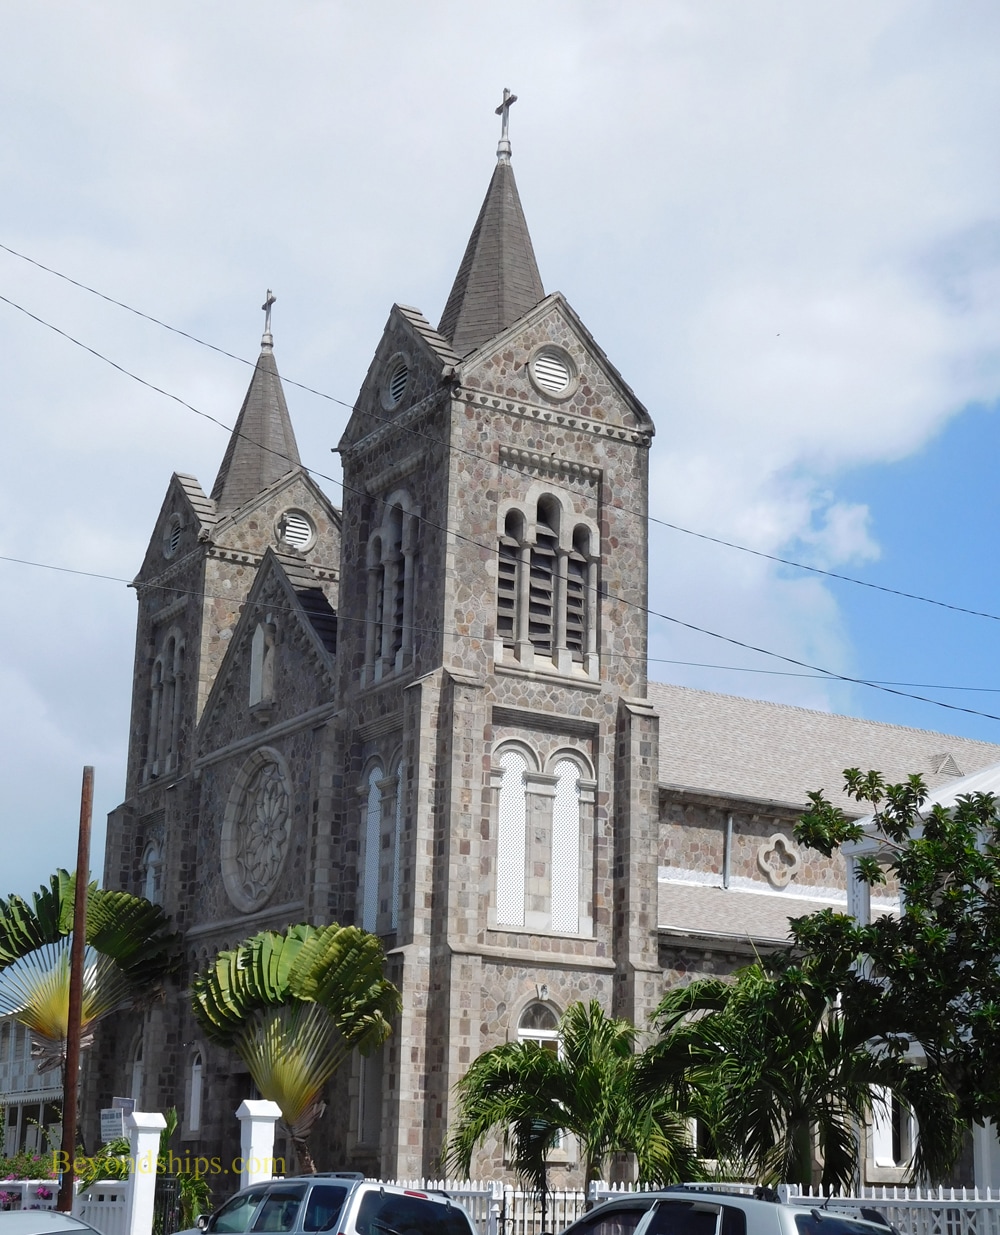 St. Kitts, Basseterre, Co-Cathedral